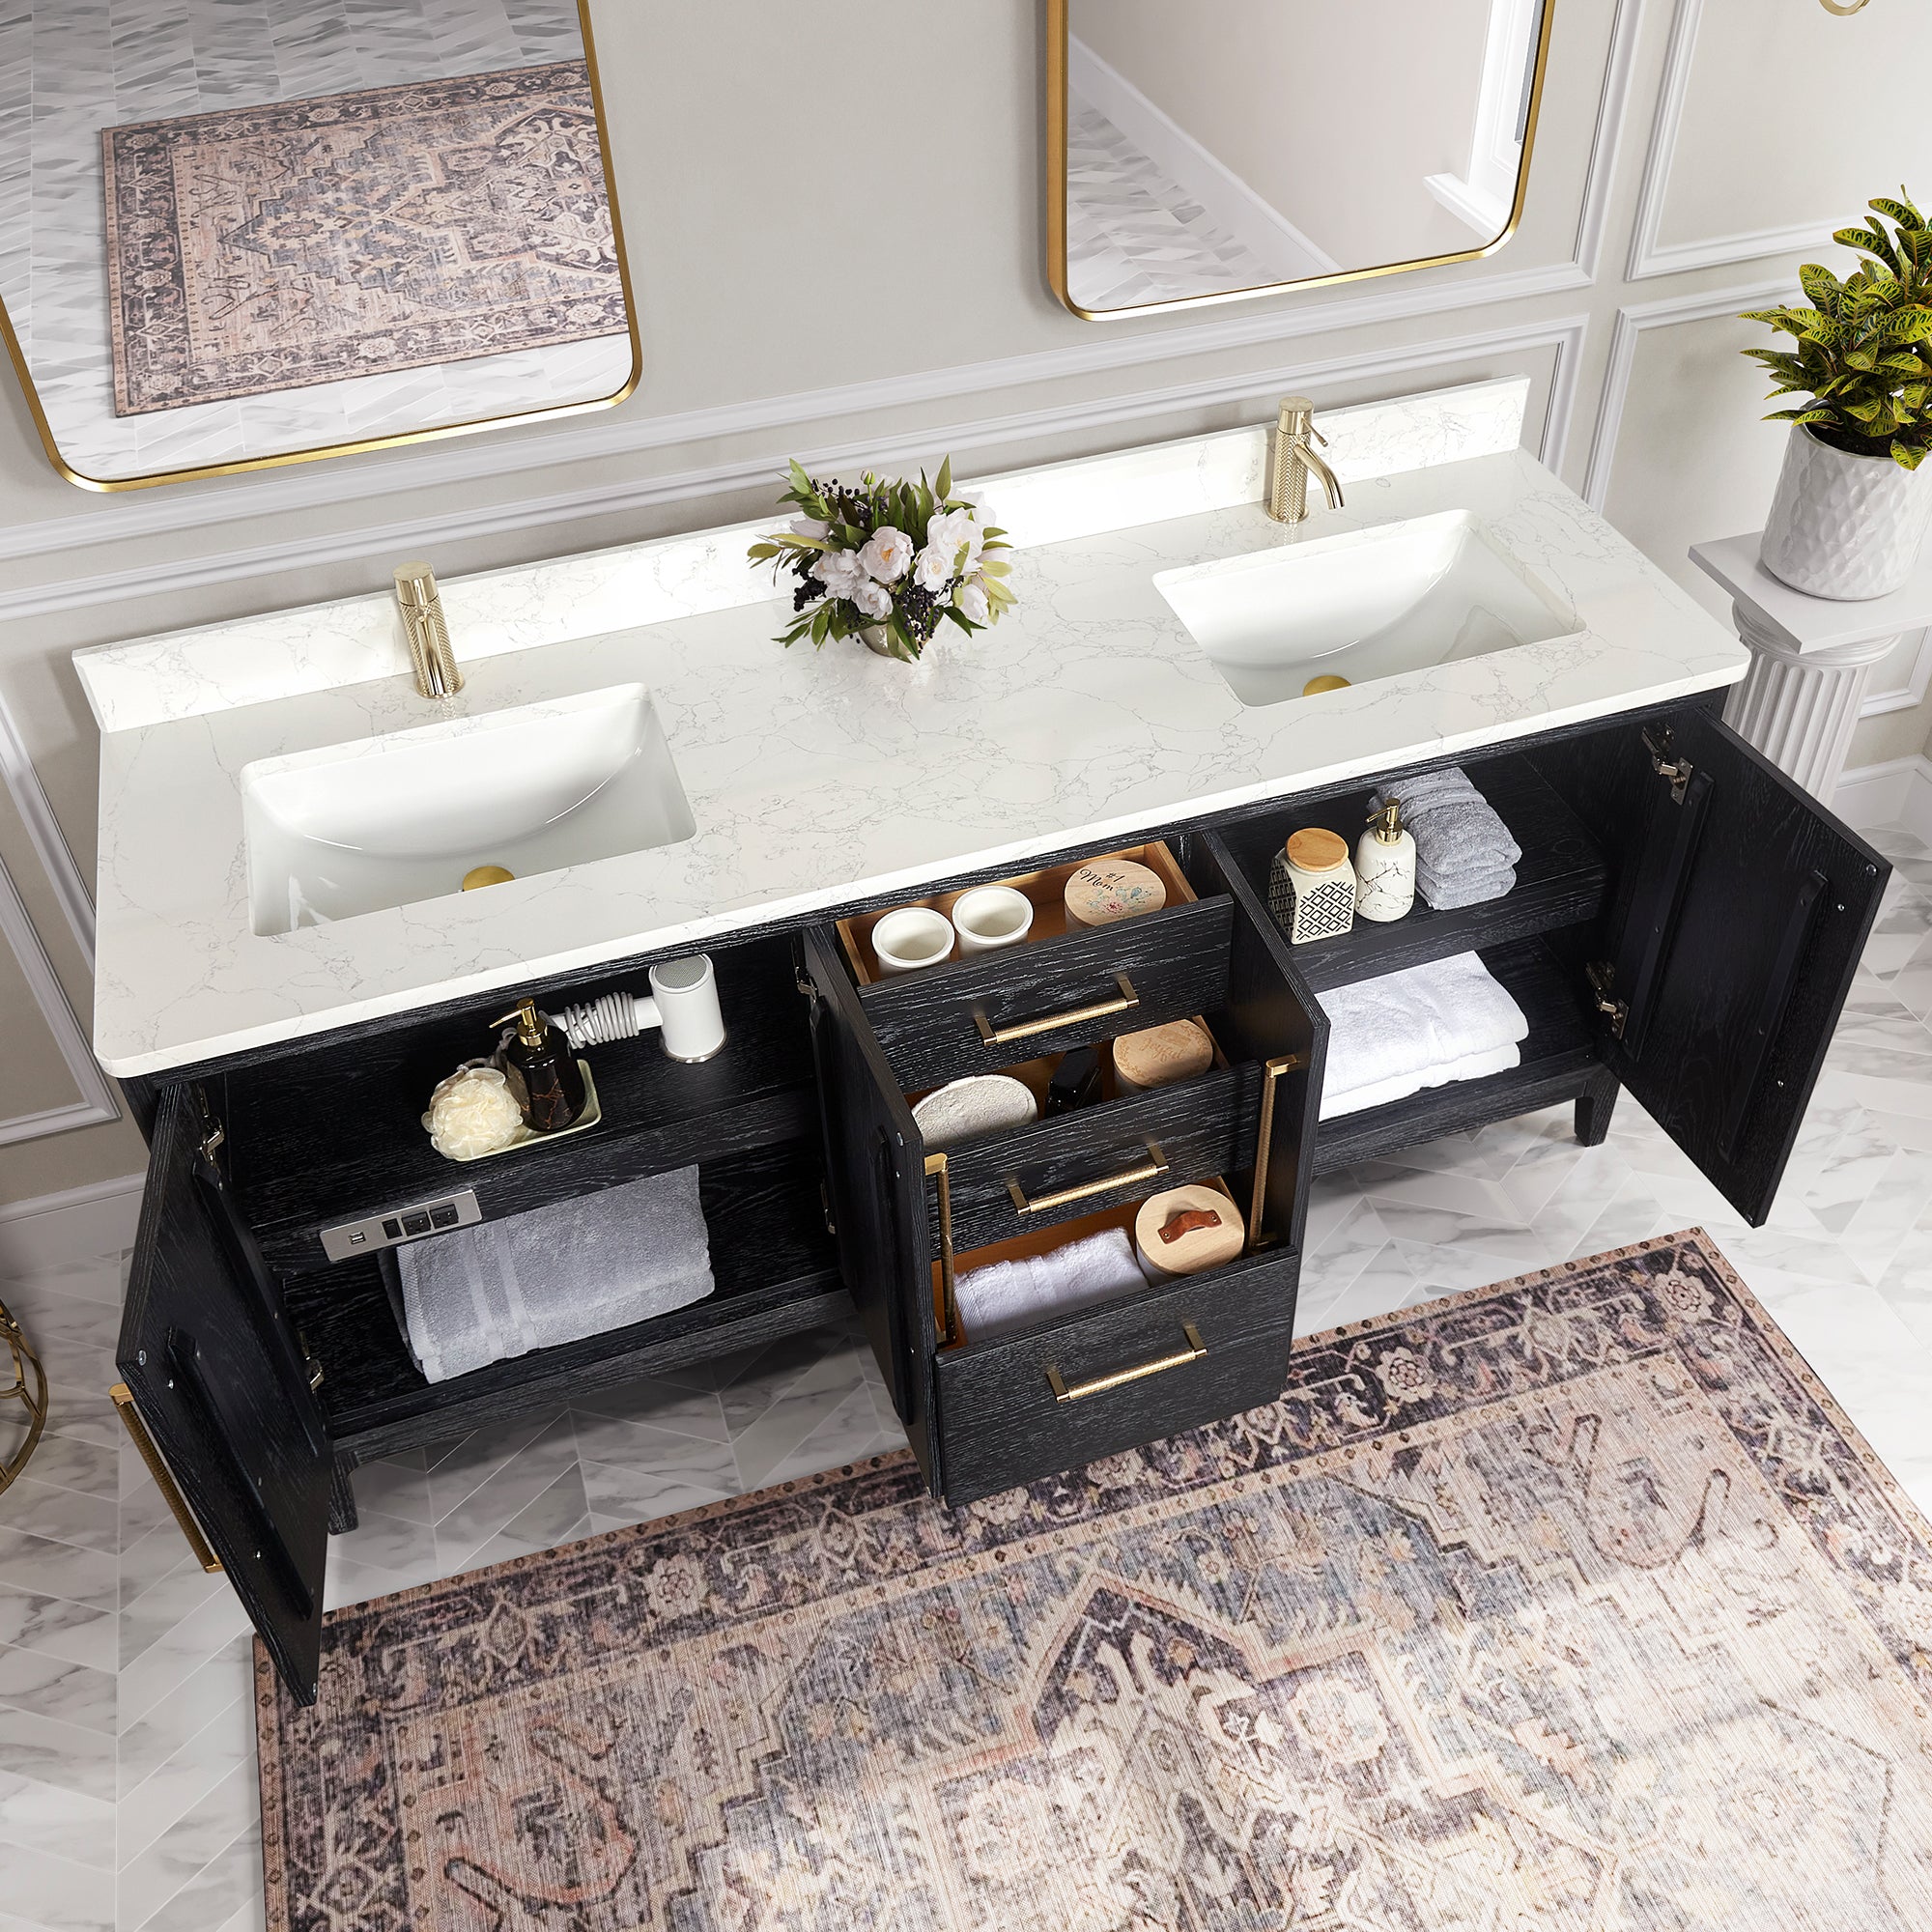 Gara 72" Free-standing Double Bath Vanity in Fir Wood Black with White Grain Composite Stone Top